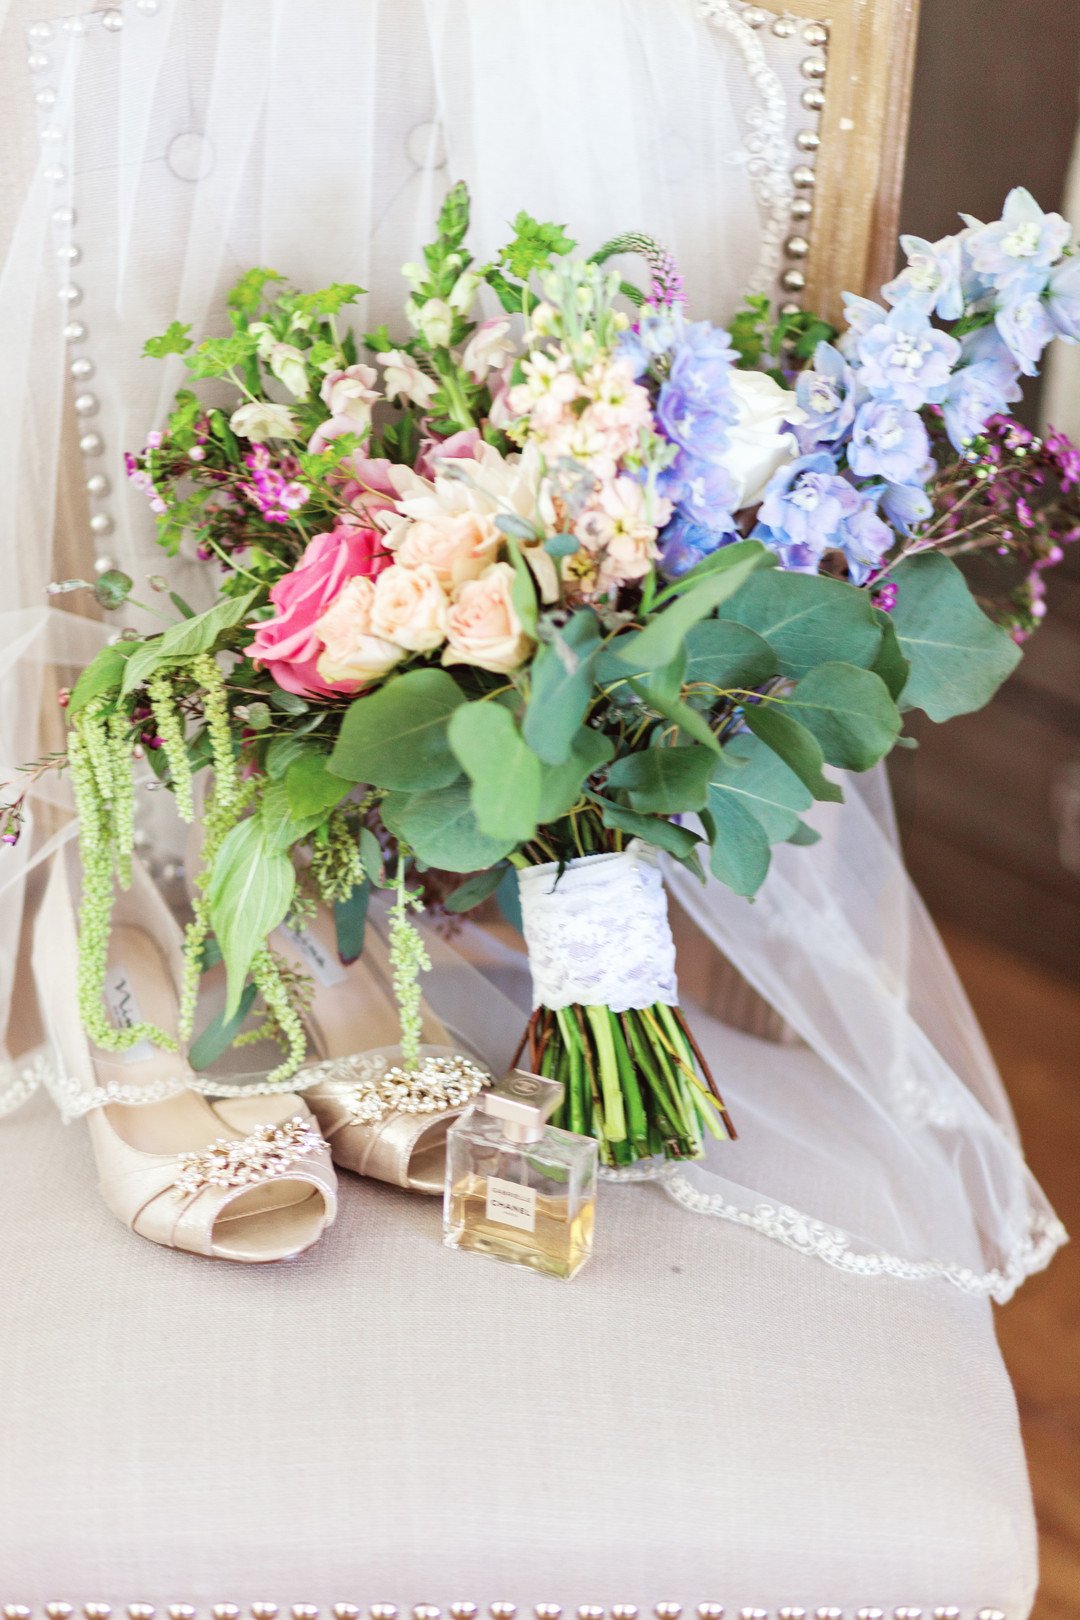 www.santabarbarawedding.com | Kay Mitchell | The Carriage House Effortless Events | Bridal Bouquet | Bride's Shoes